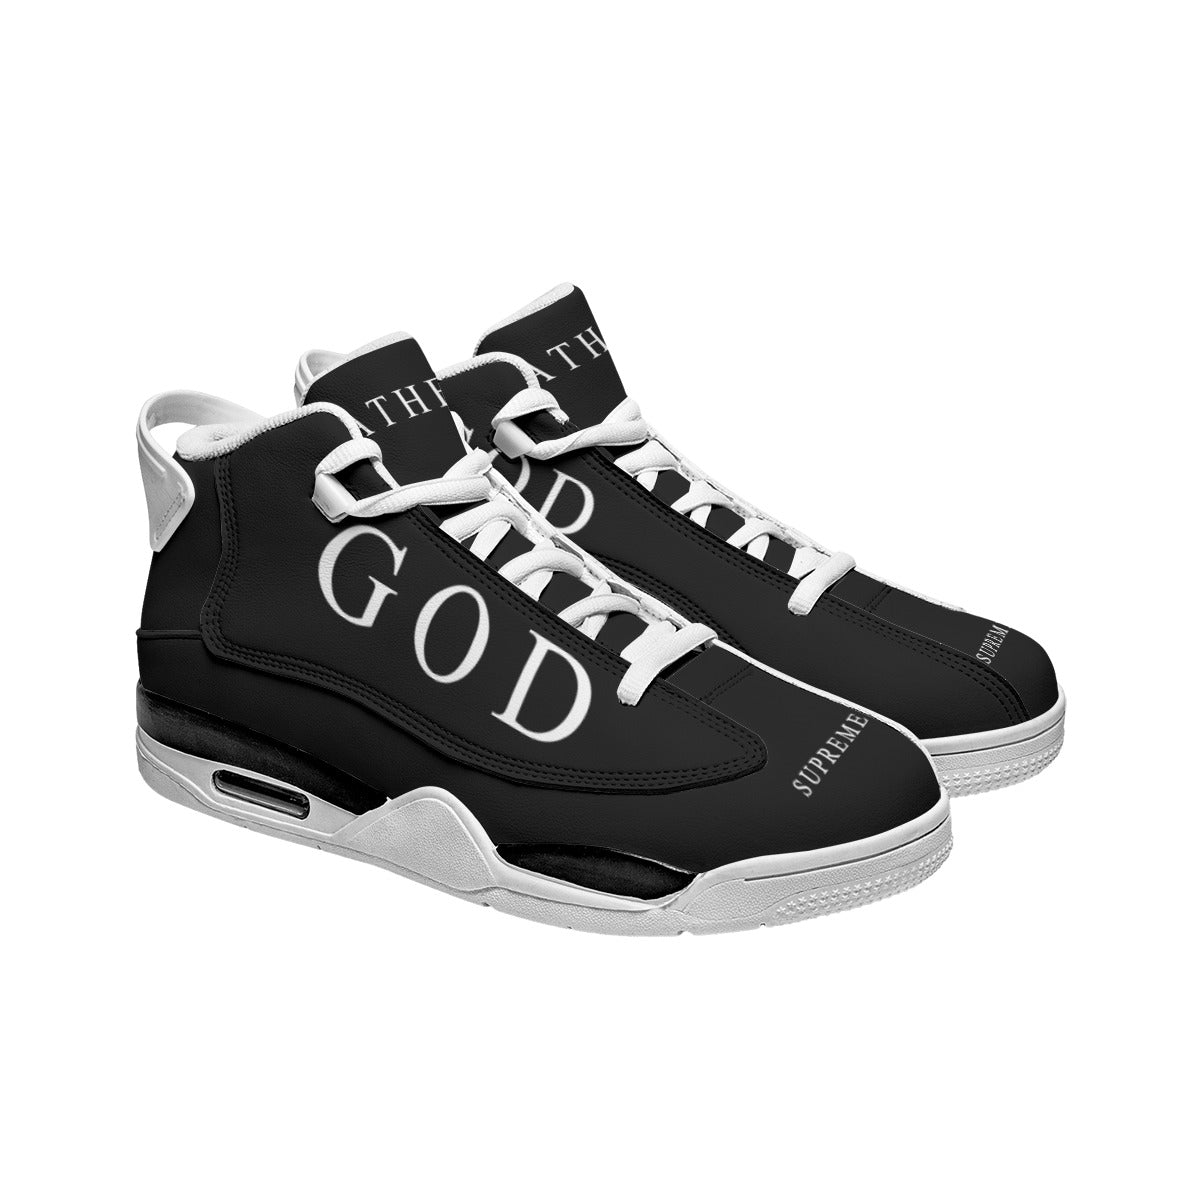 Men's Shock Absorption and Non-Slip Basketball Shoes GS